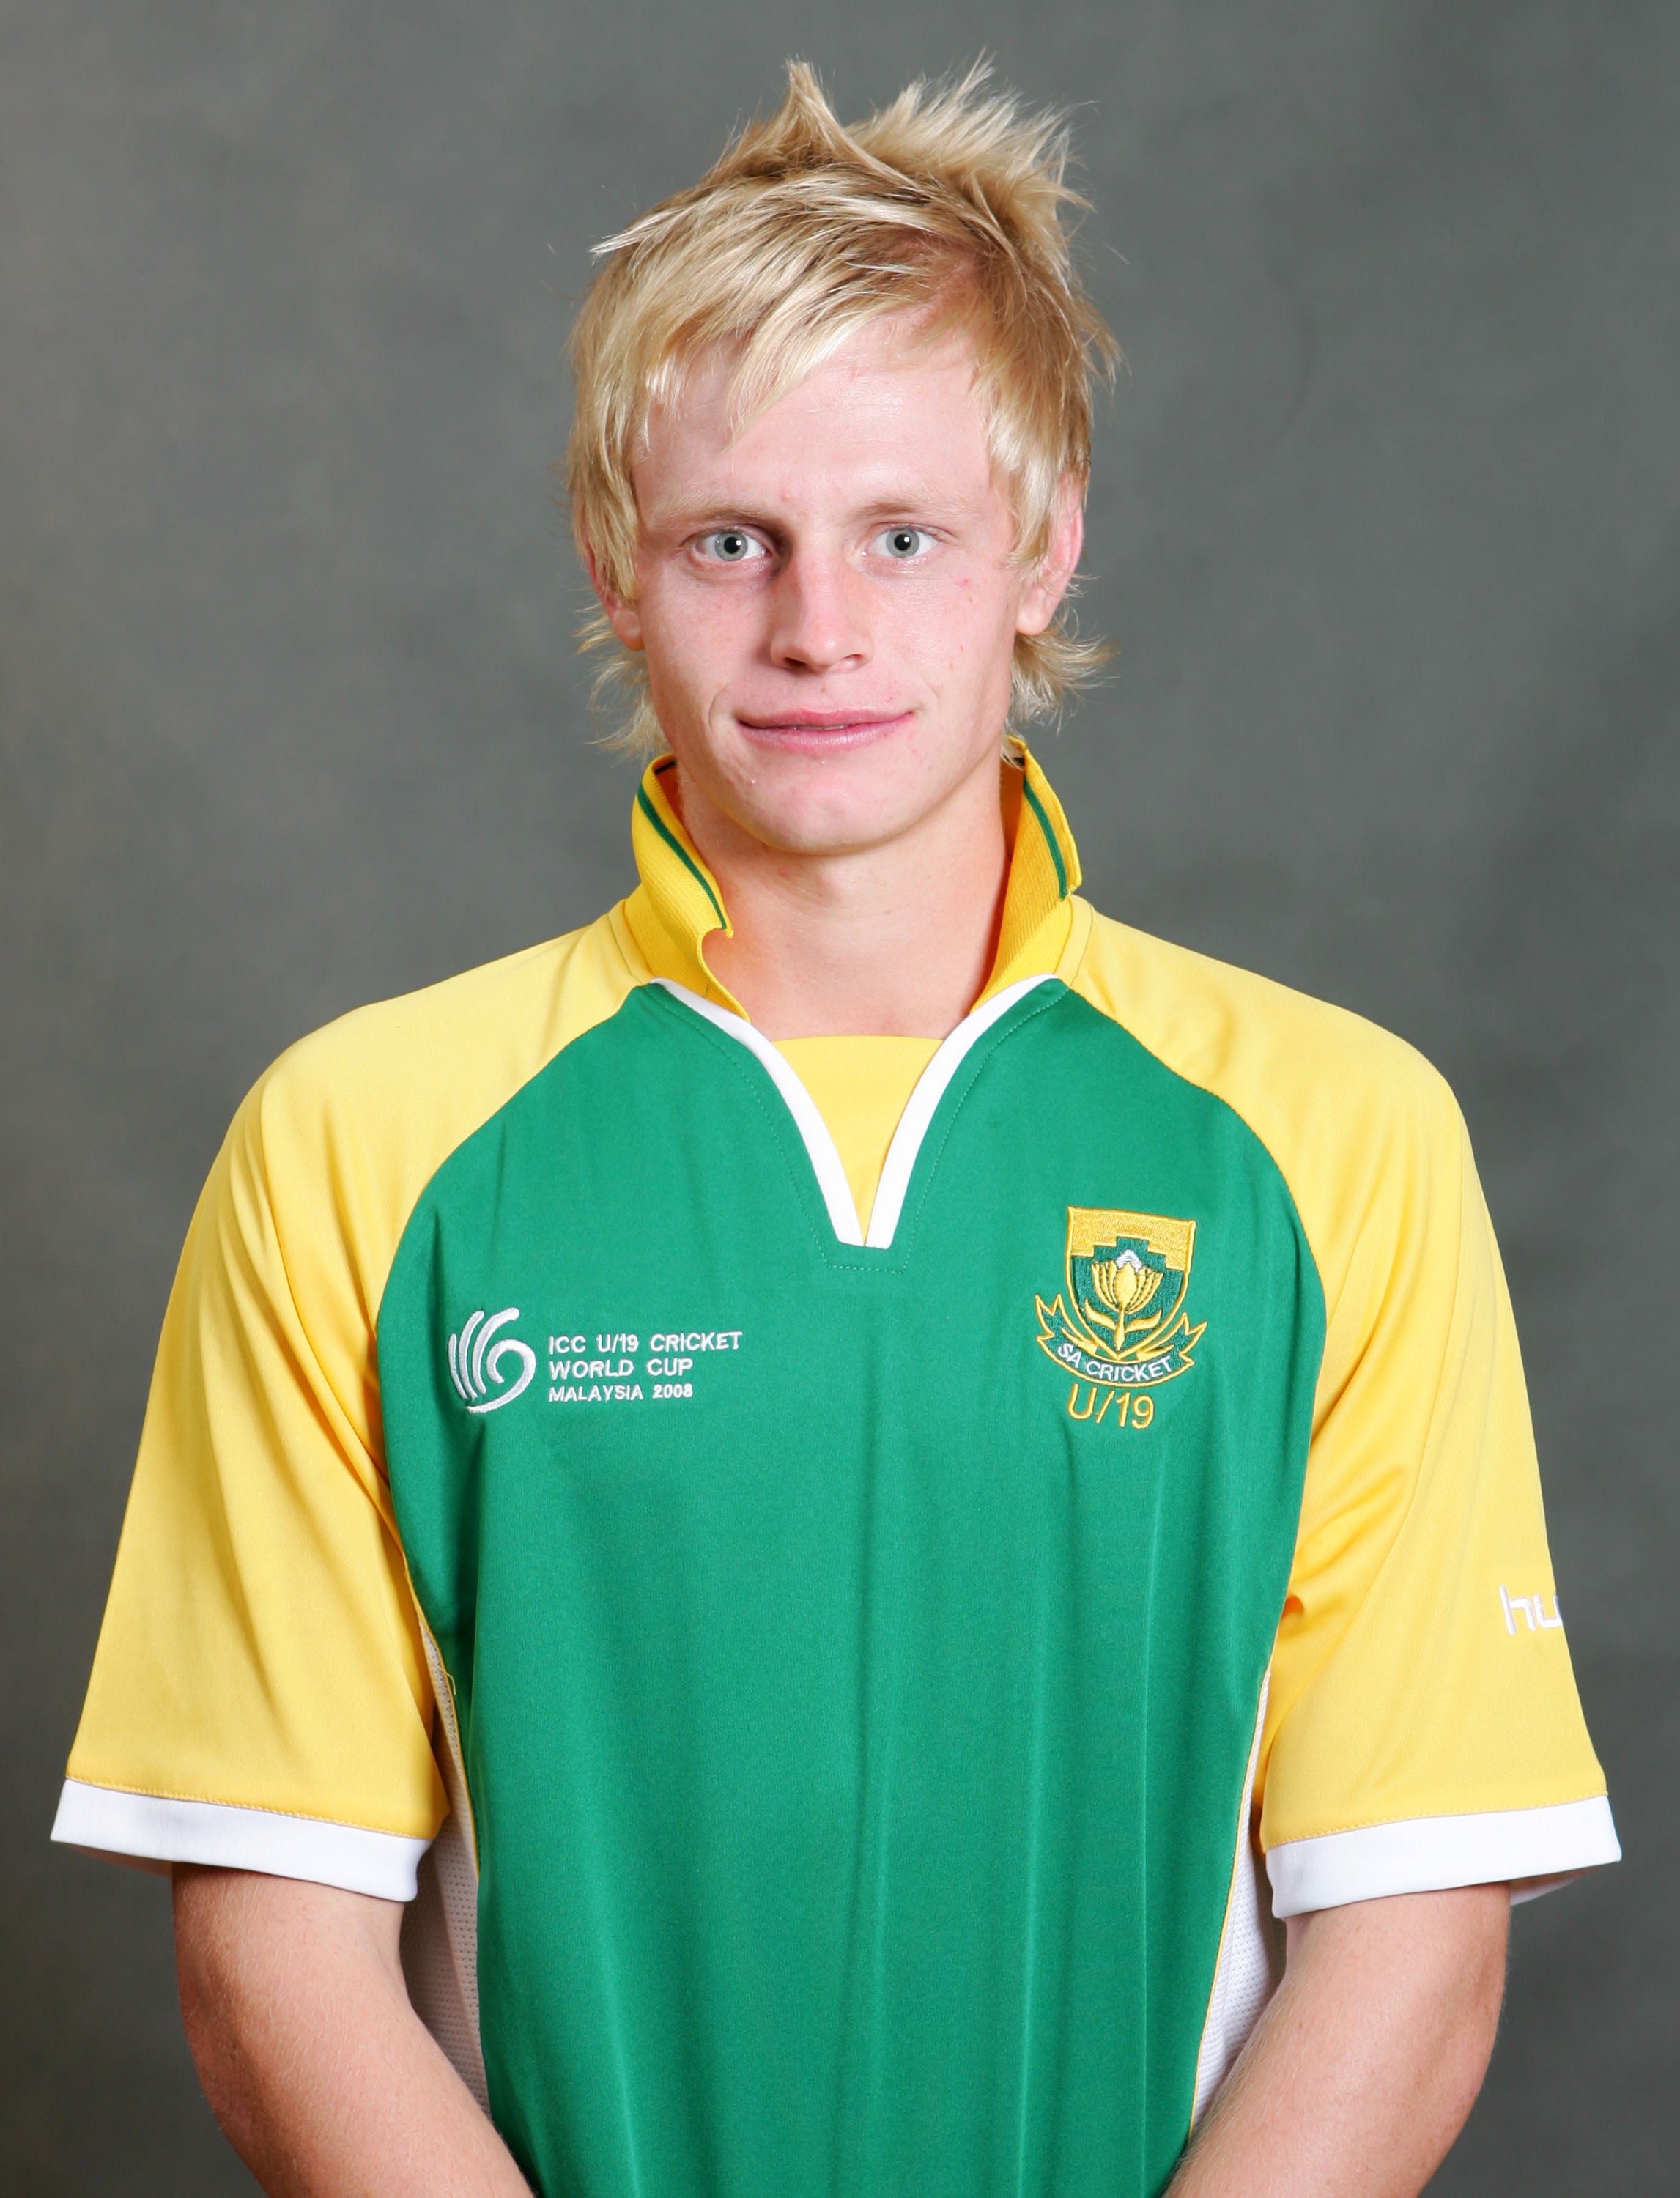 Sybrand Engelbrecht, who played for South Africa during the ICC U/19 Cricket World Cup, poses for an official team photo call at the Sunway Hotel on 13 February 2008 in Kuala Lumpur